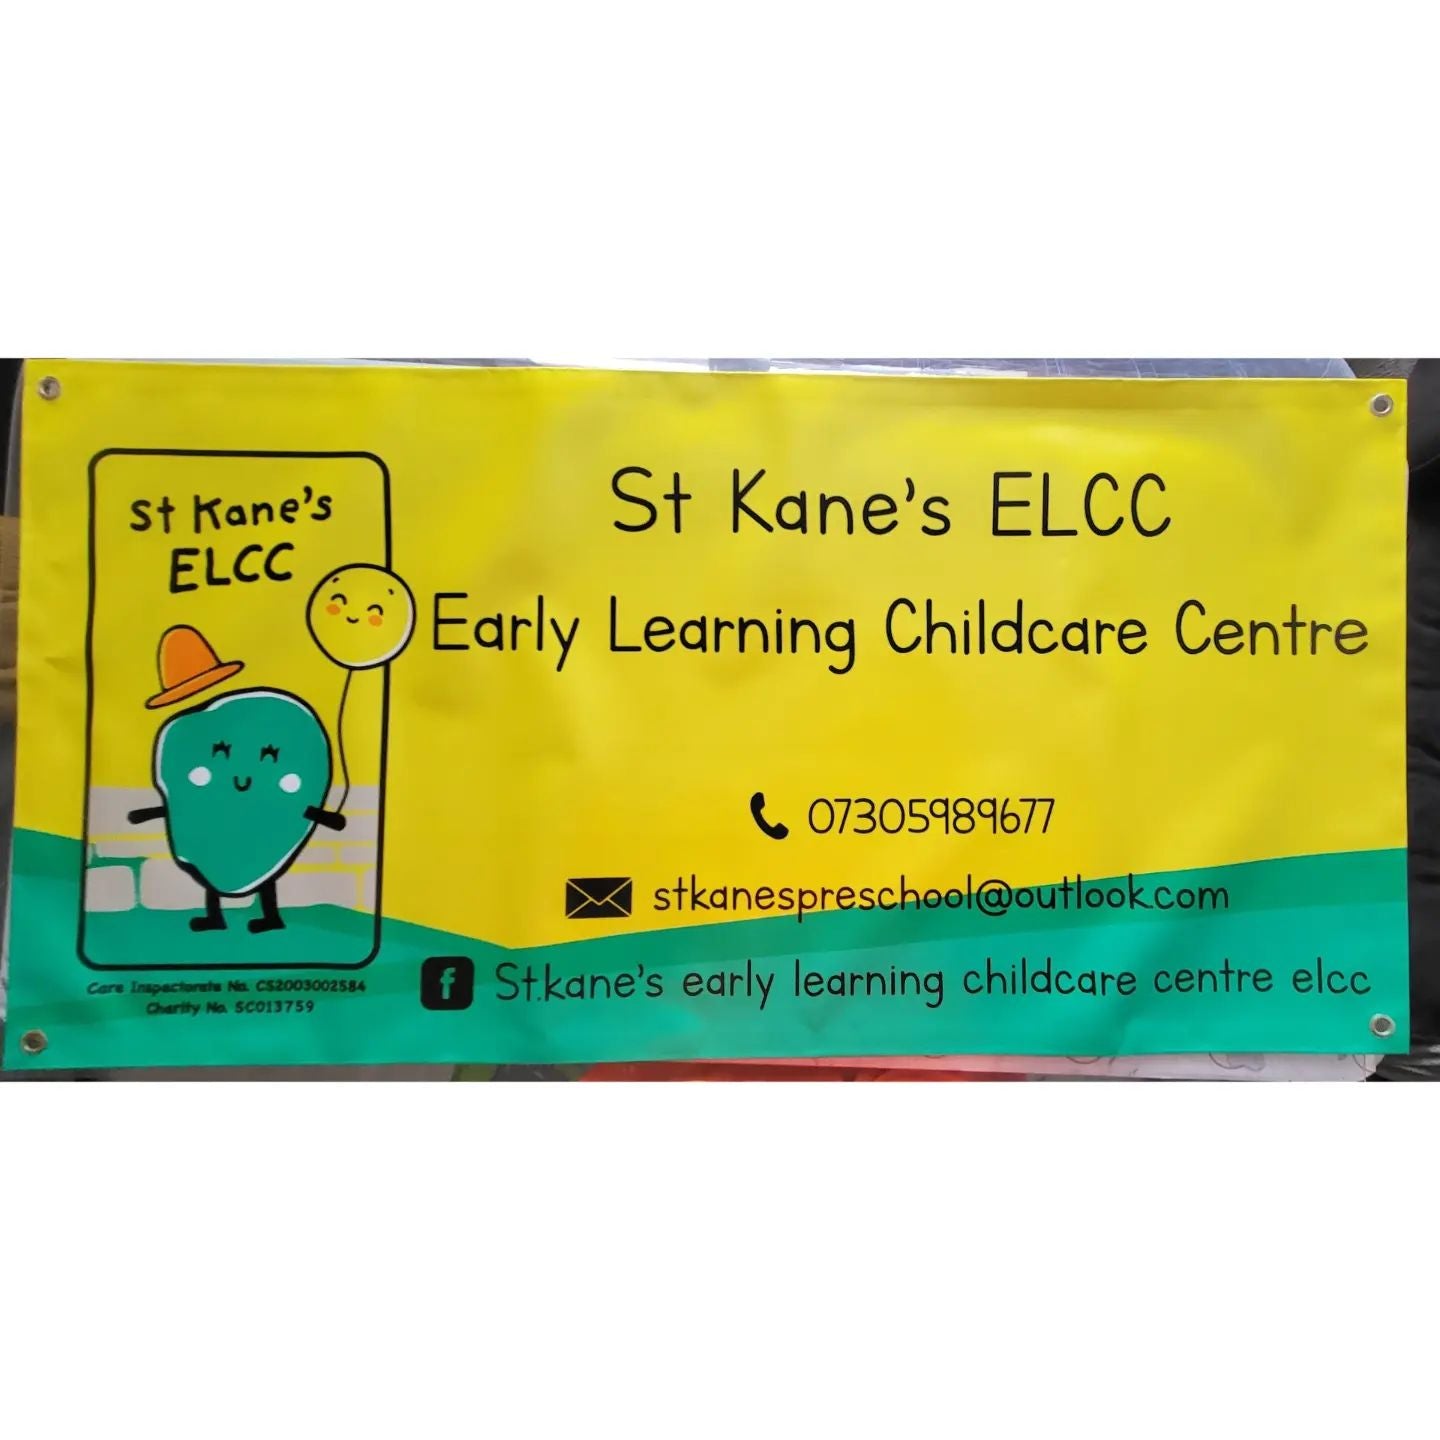 PVC Banner for a school to show contact info